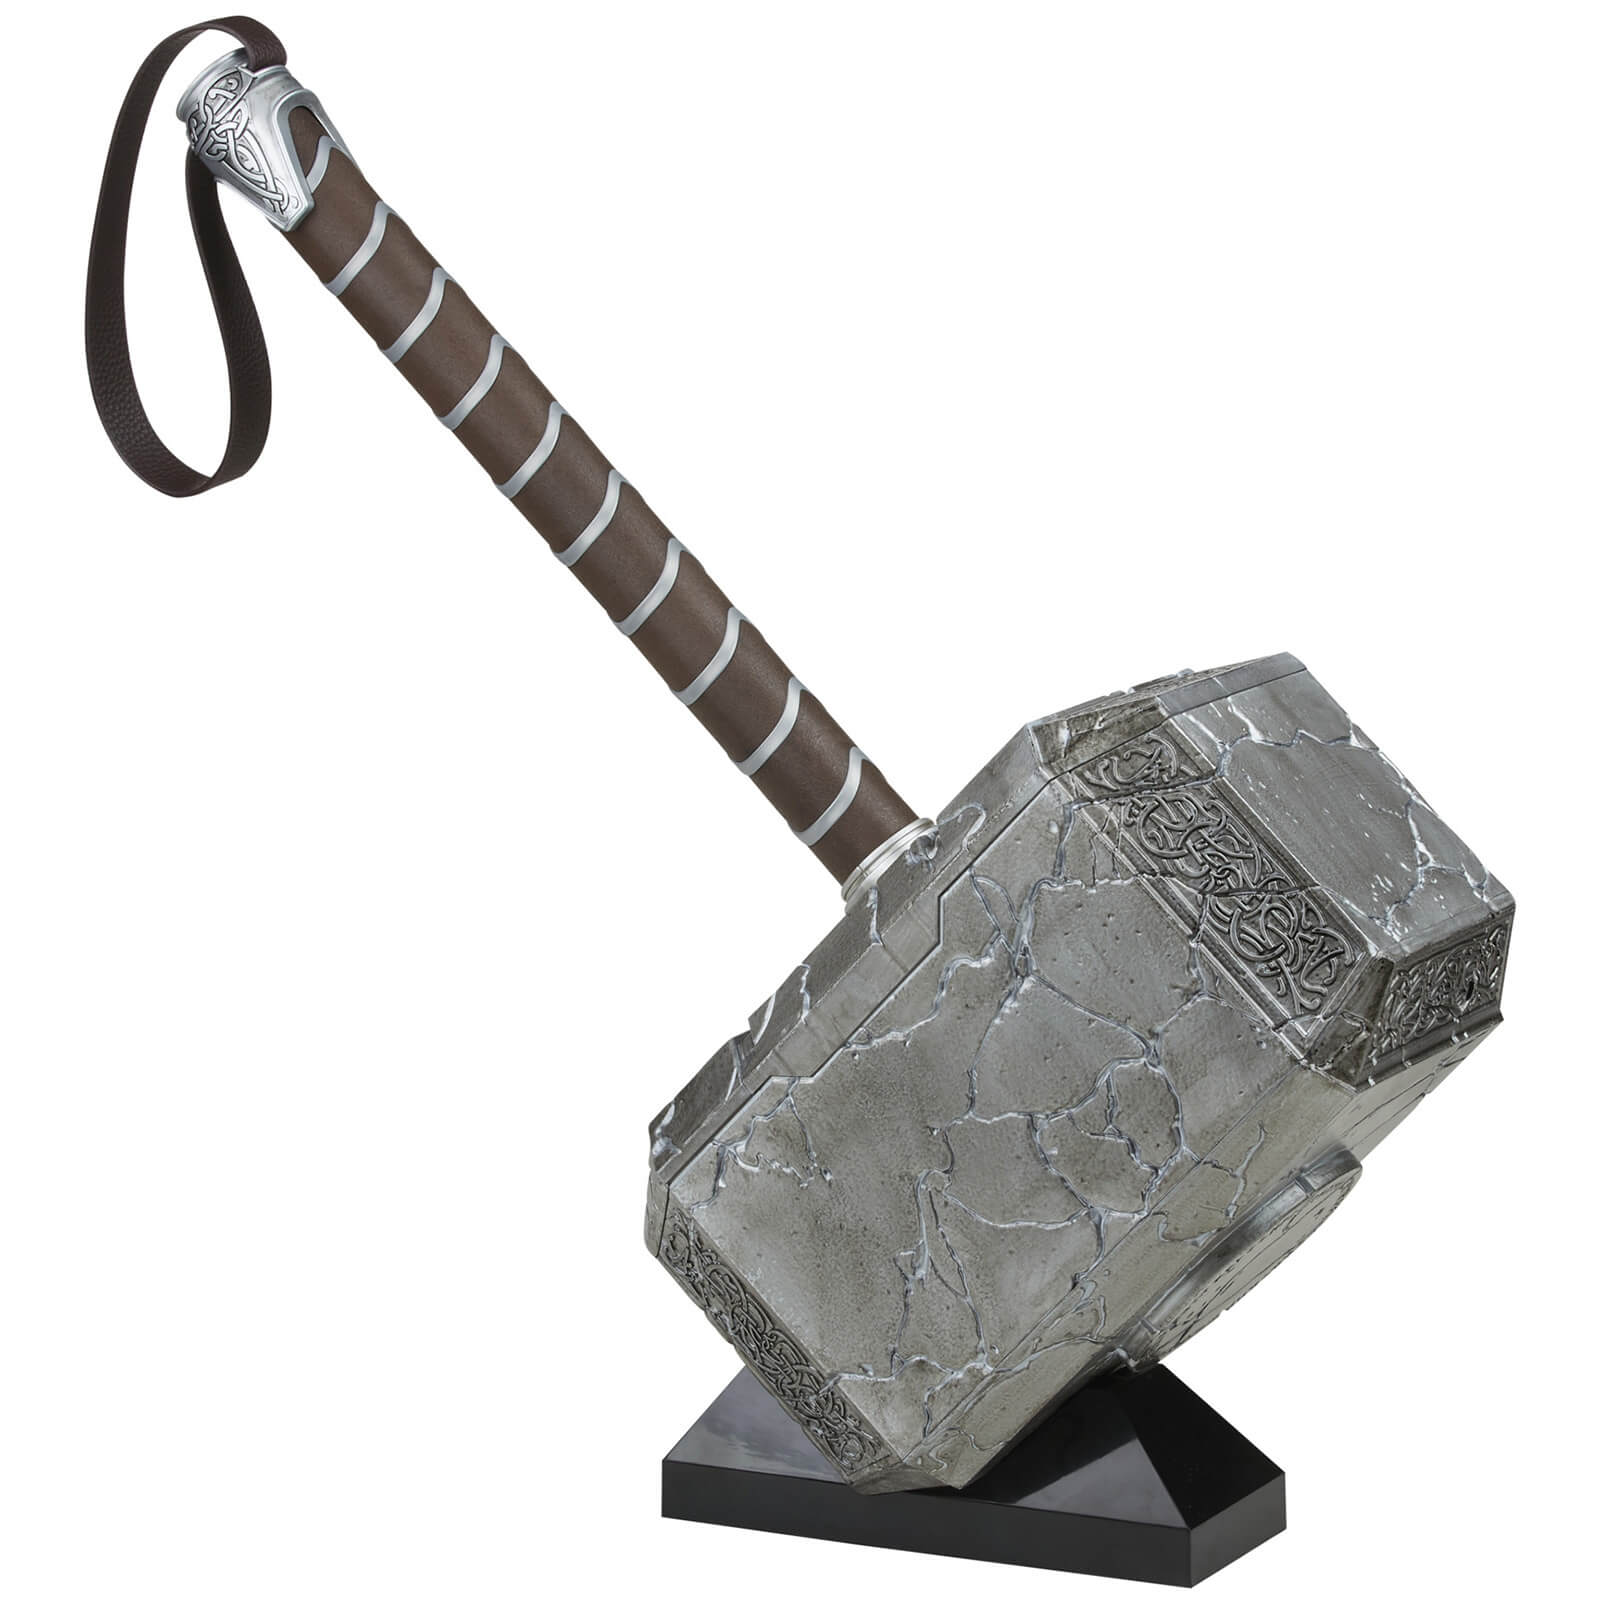 Hasbro Marvel Legends Series Mighty Thor Mjolnir Premium Electronic Roleplay Hammer 1:1 Scale Replica